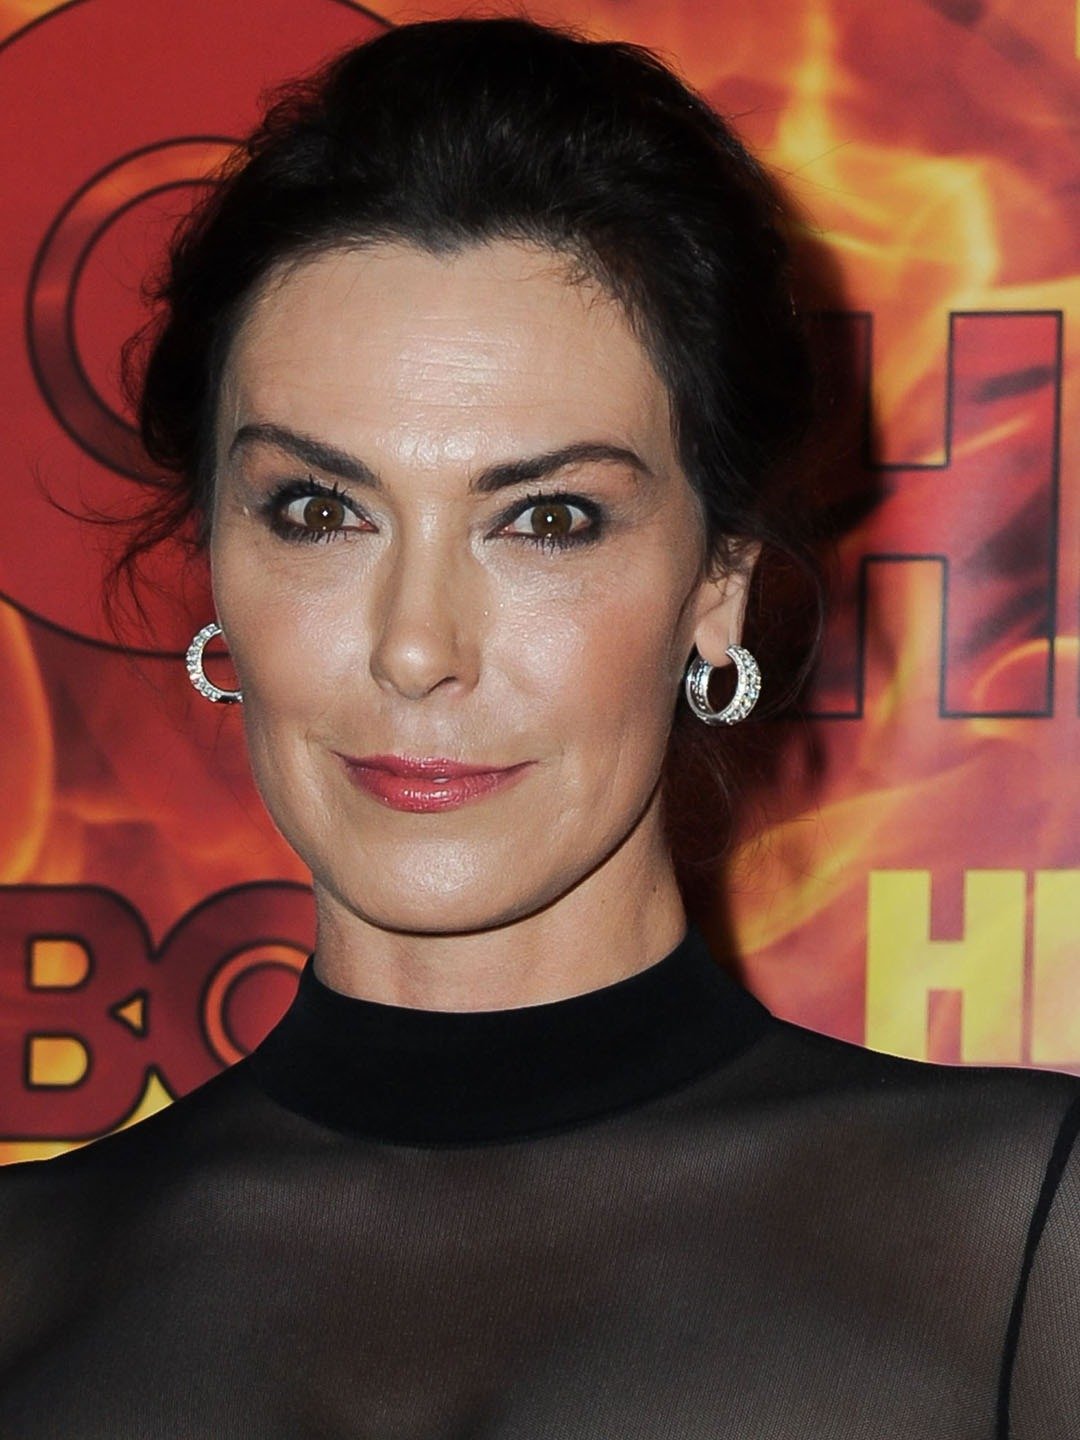 How tall is Michelle Forbes?